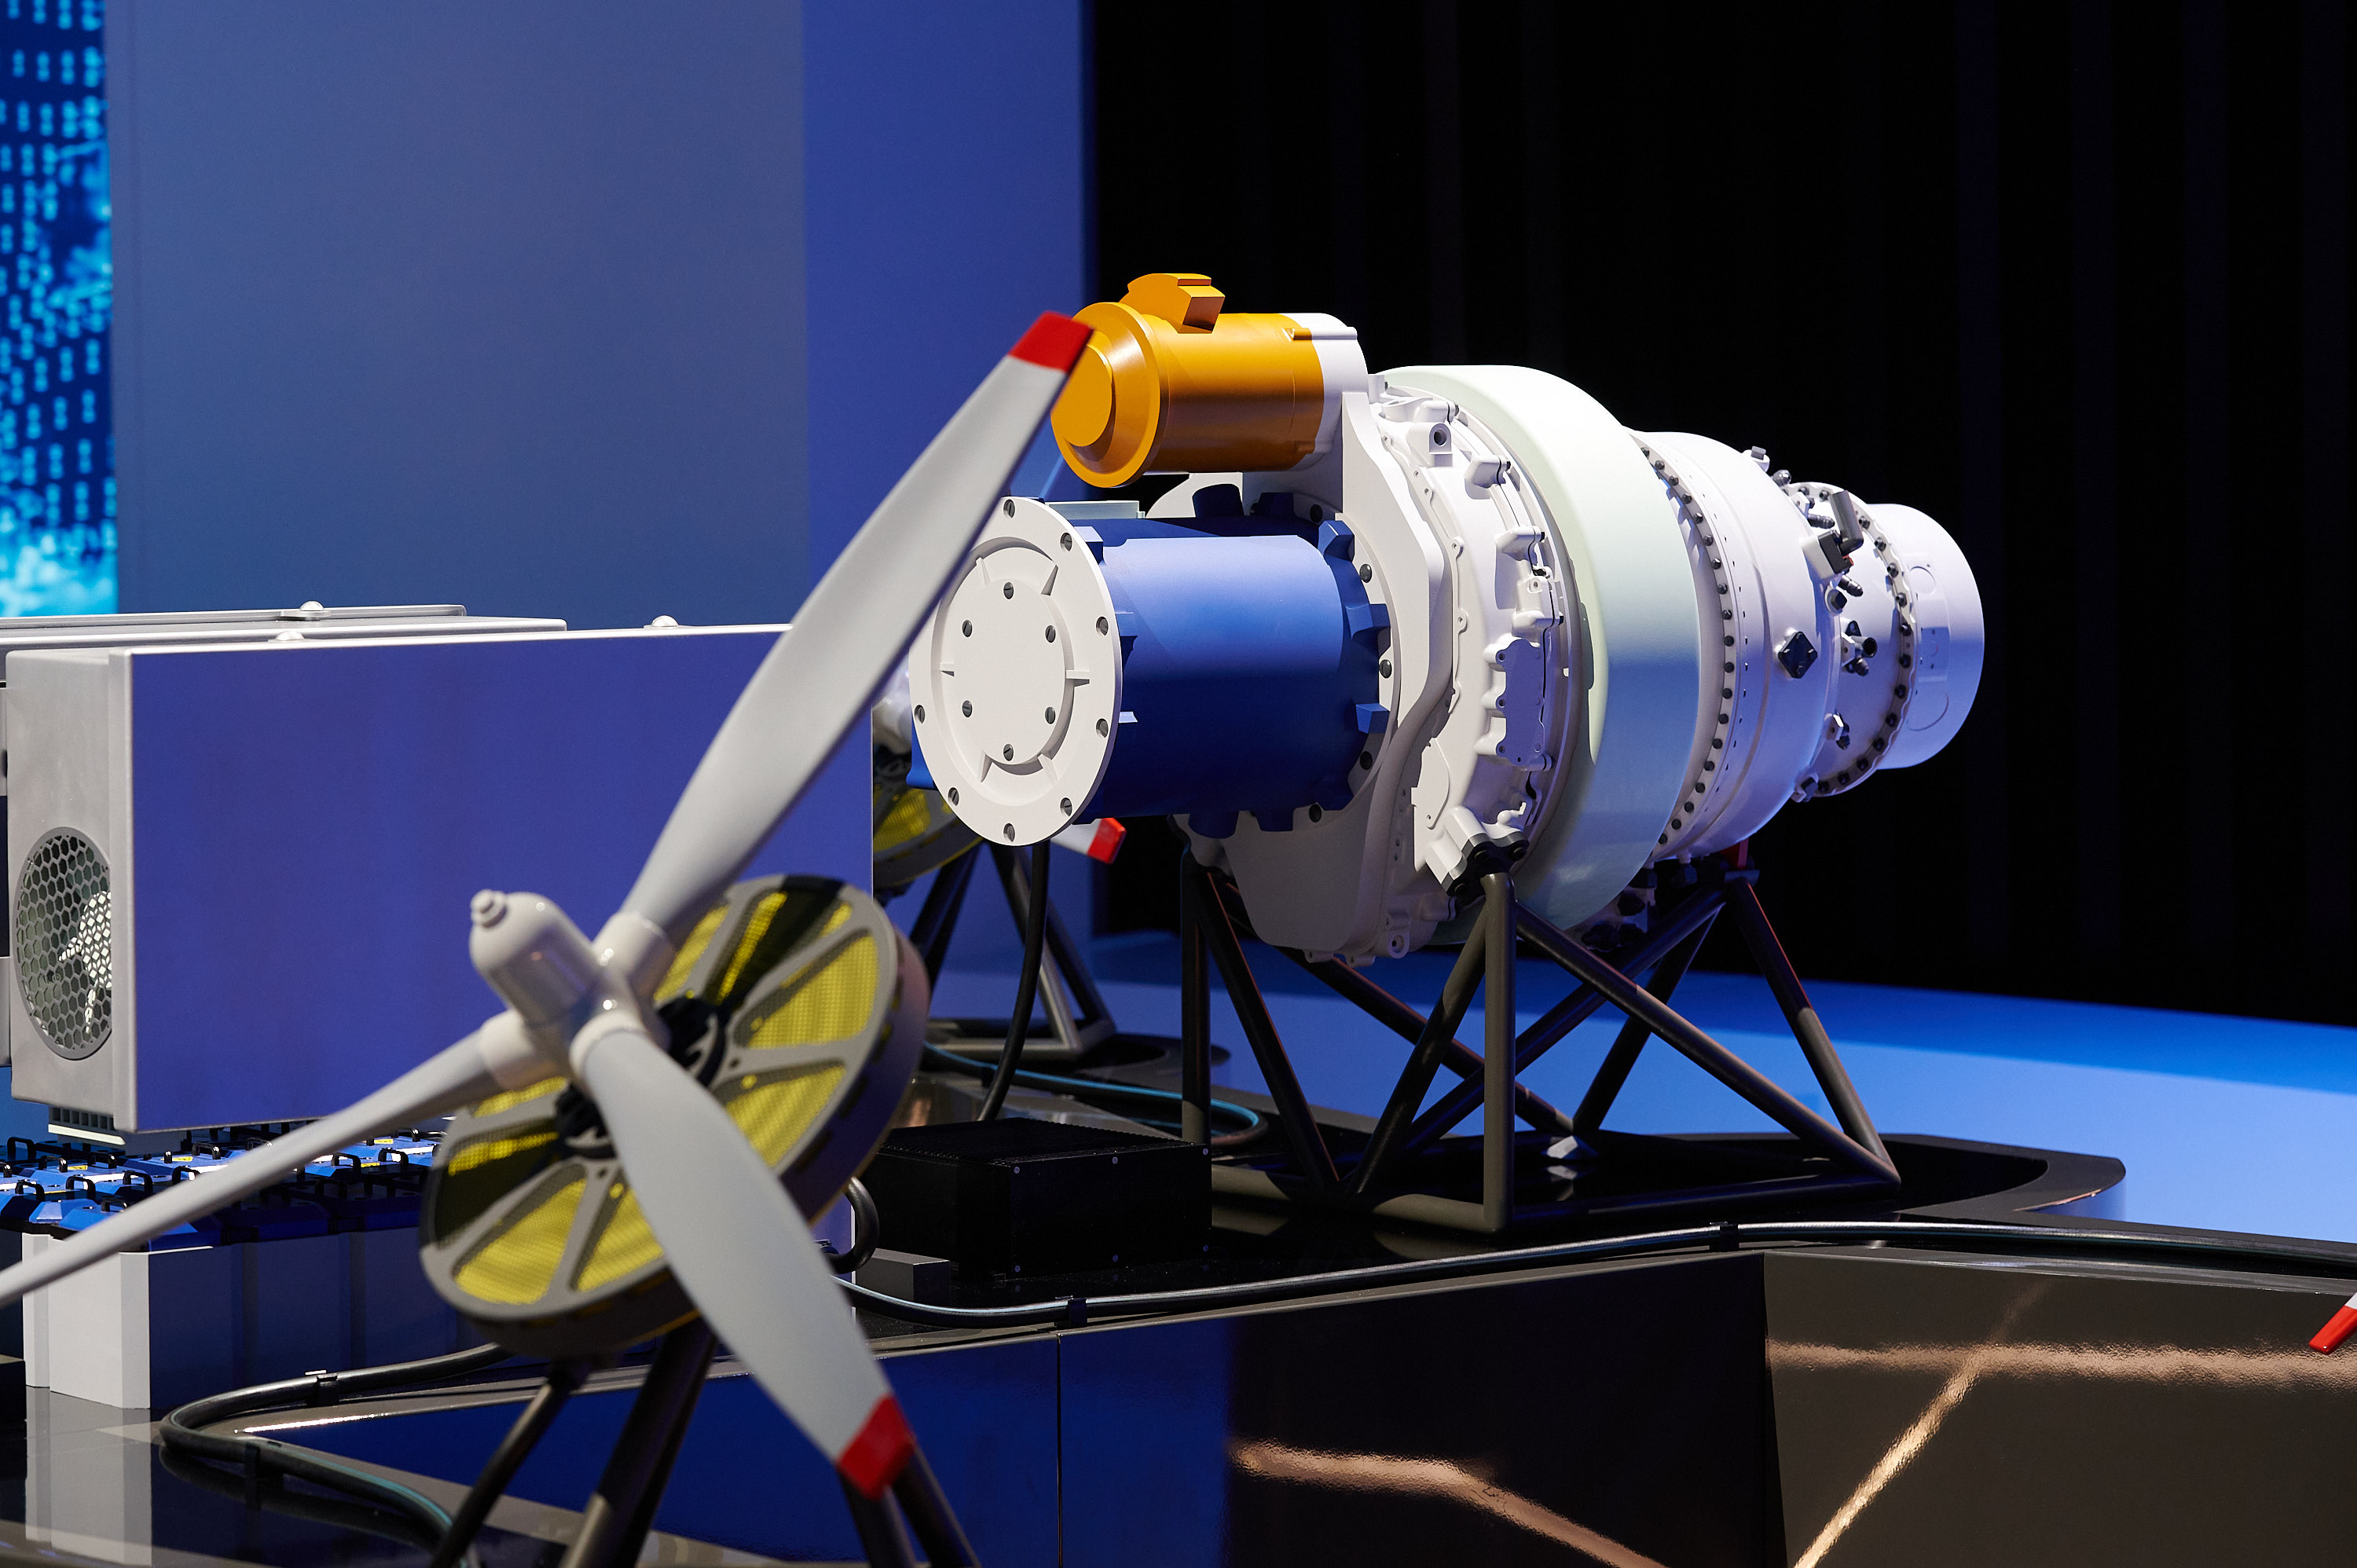 Rostec to Assemble a Hybrid Propulsion System Demonstrator by the End of 2022